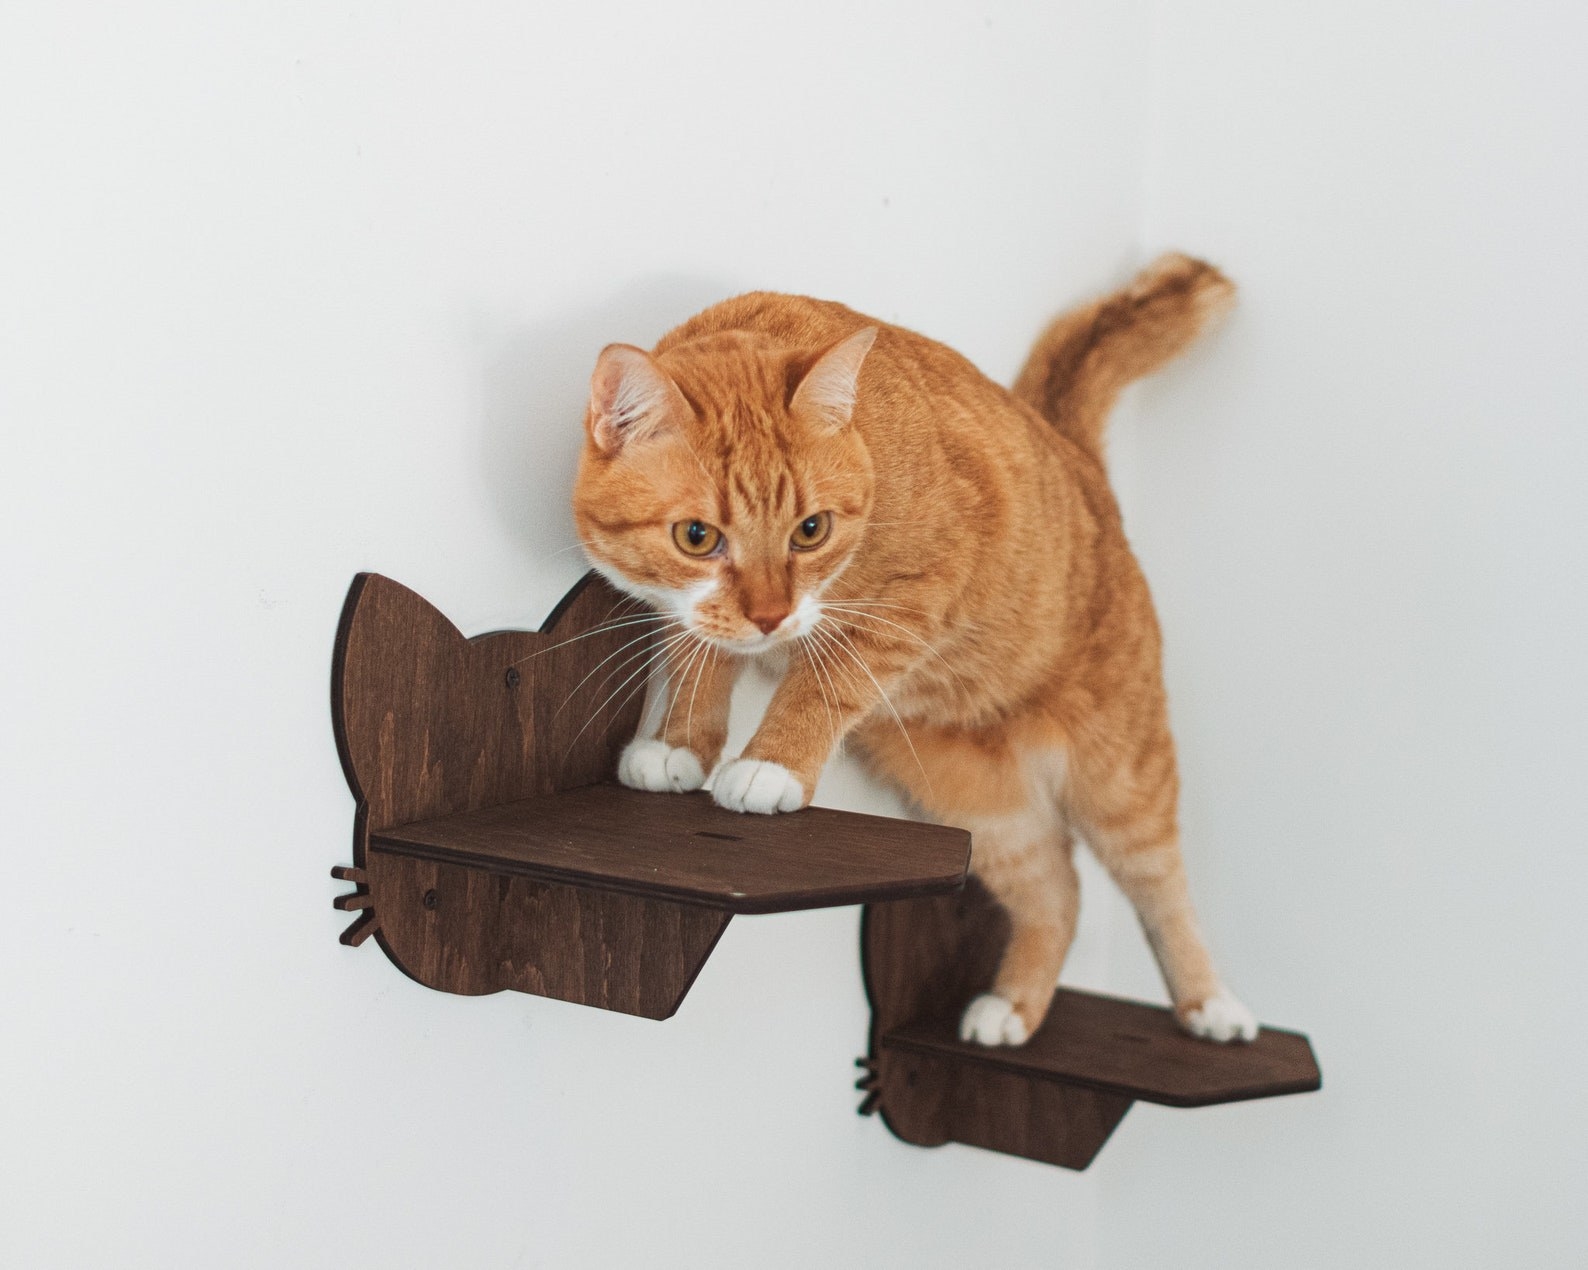 An orange cat climbing the wood steps mounted to the wall